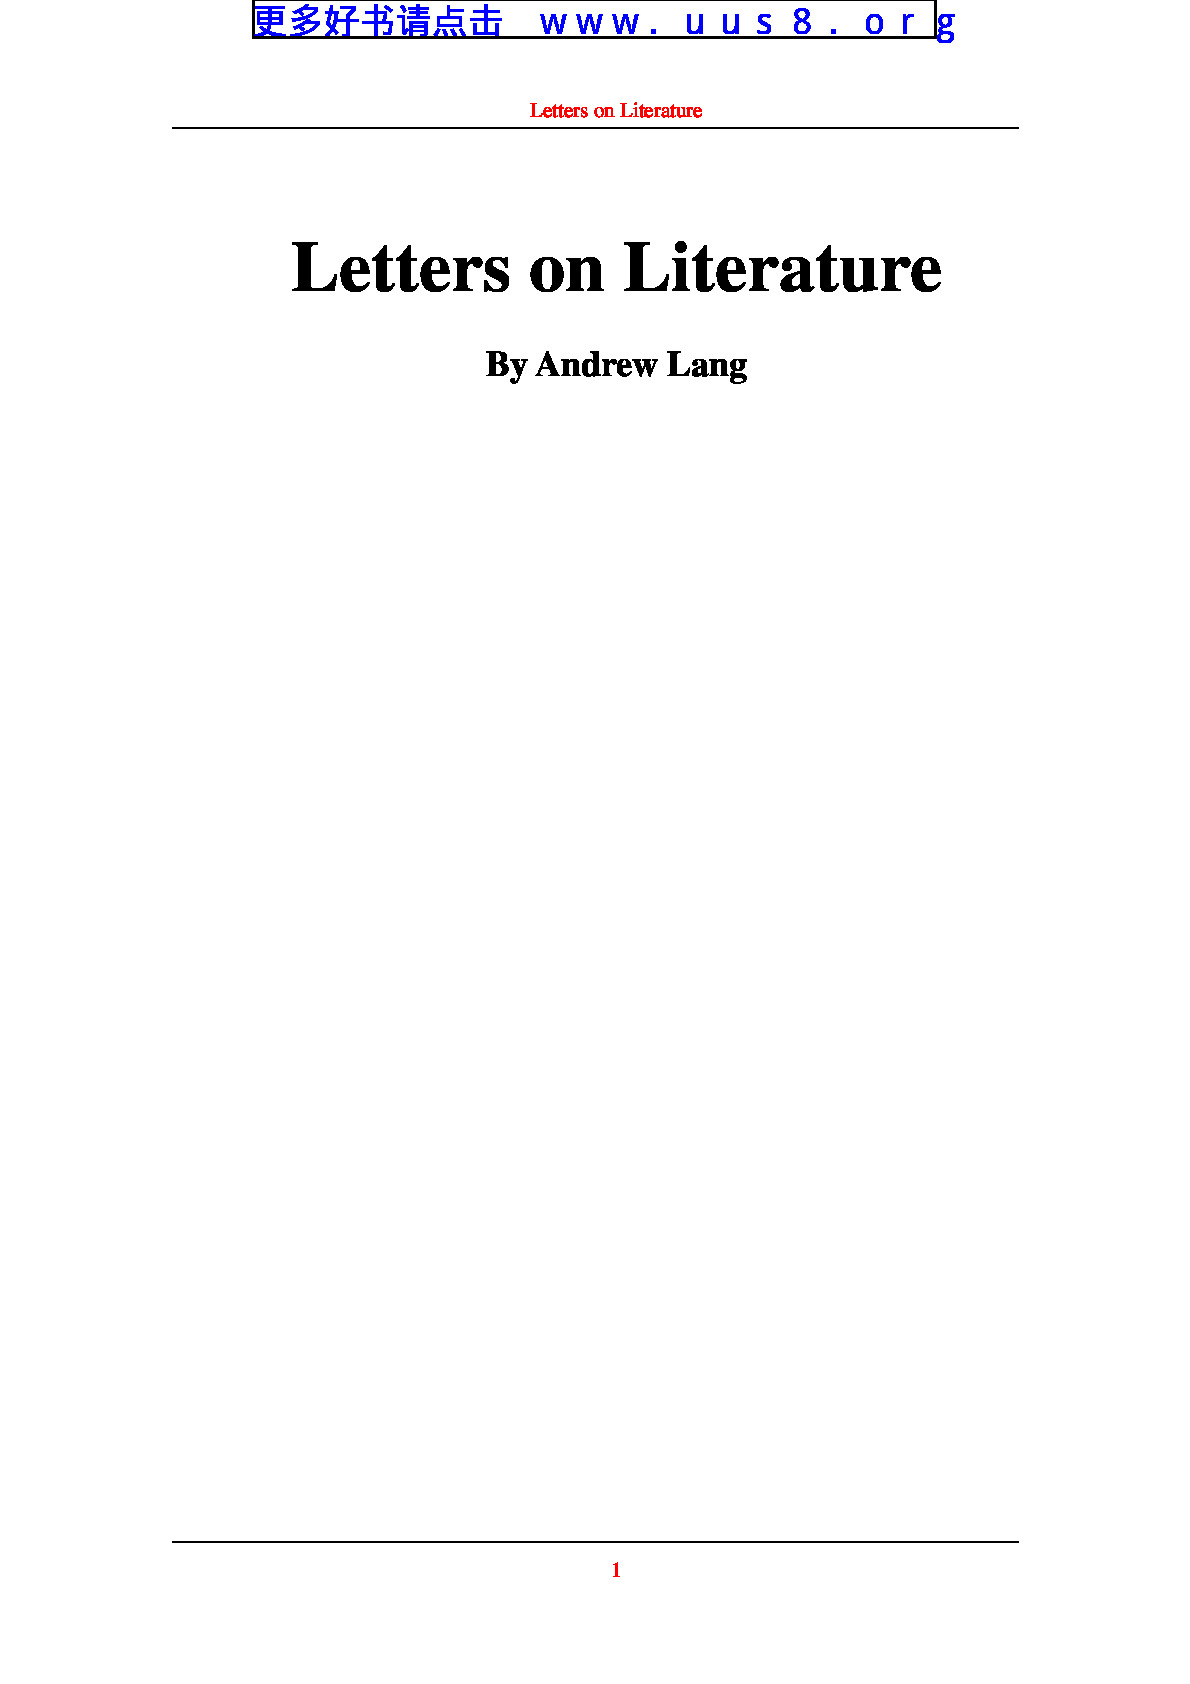 Letters_on_Literature(关于文学)